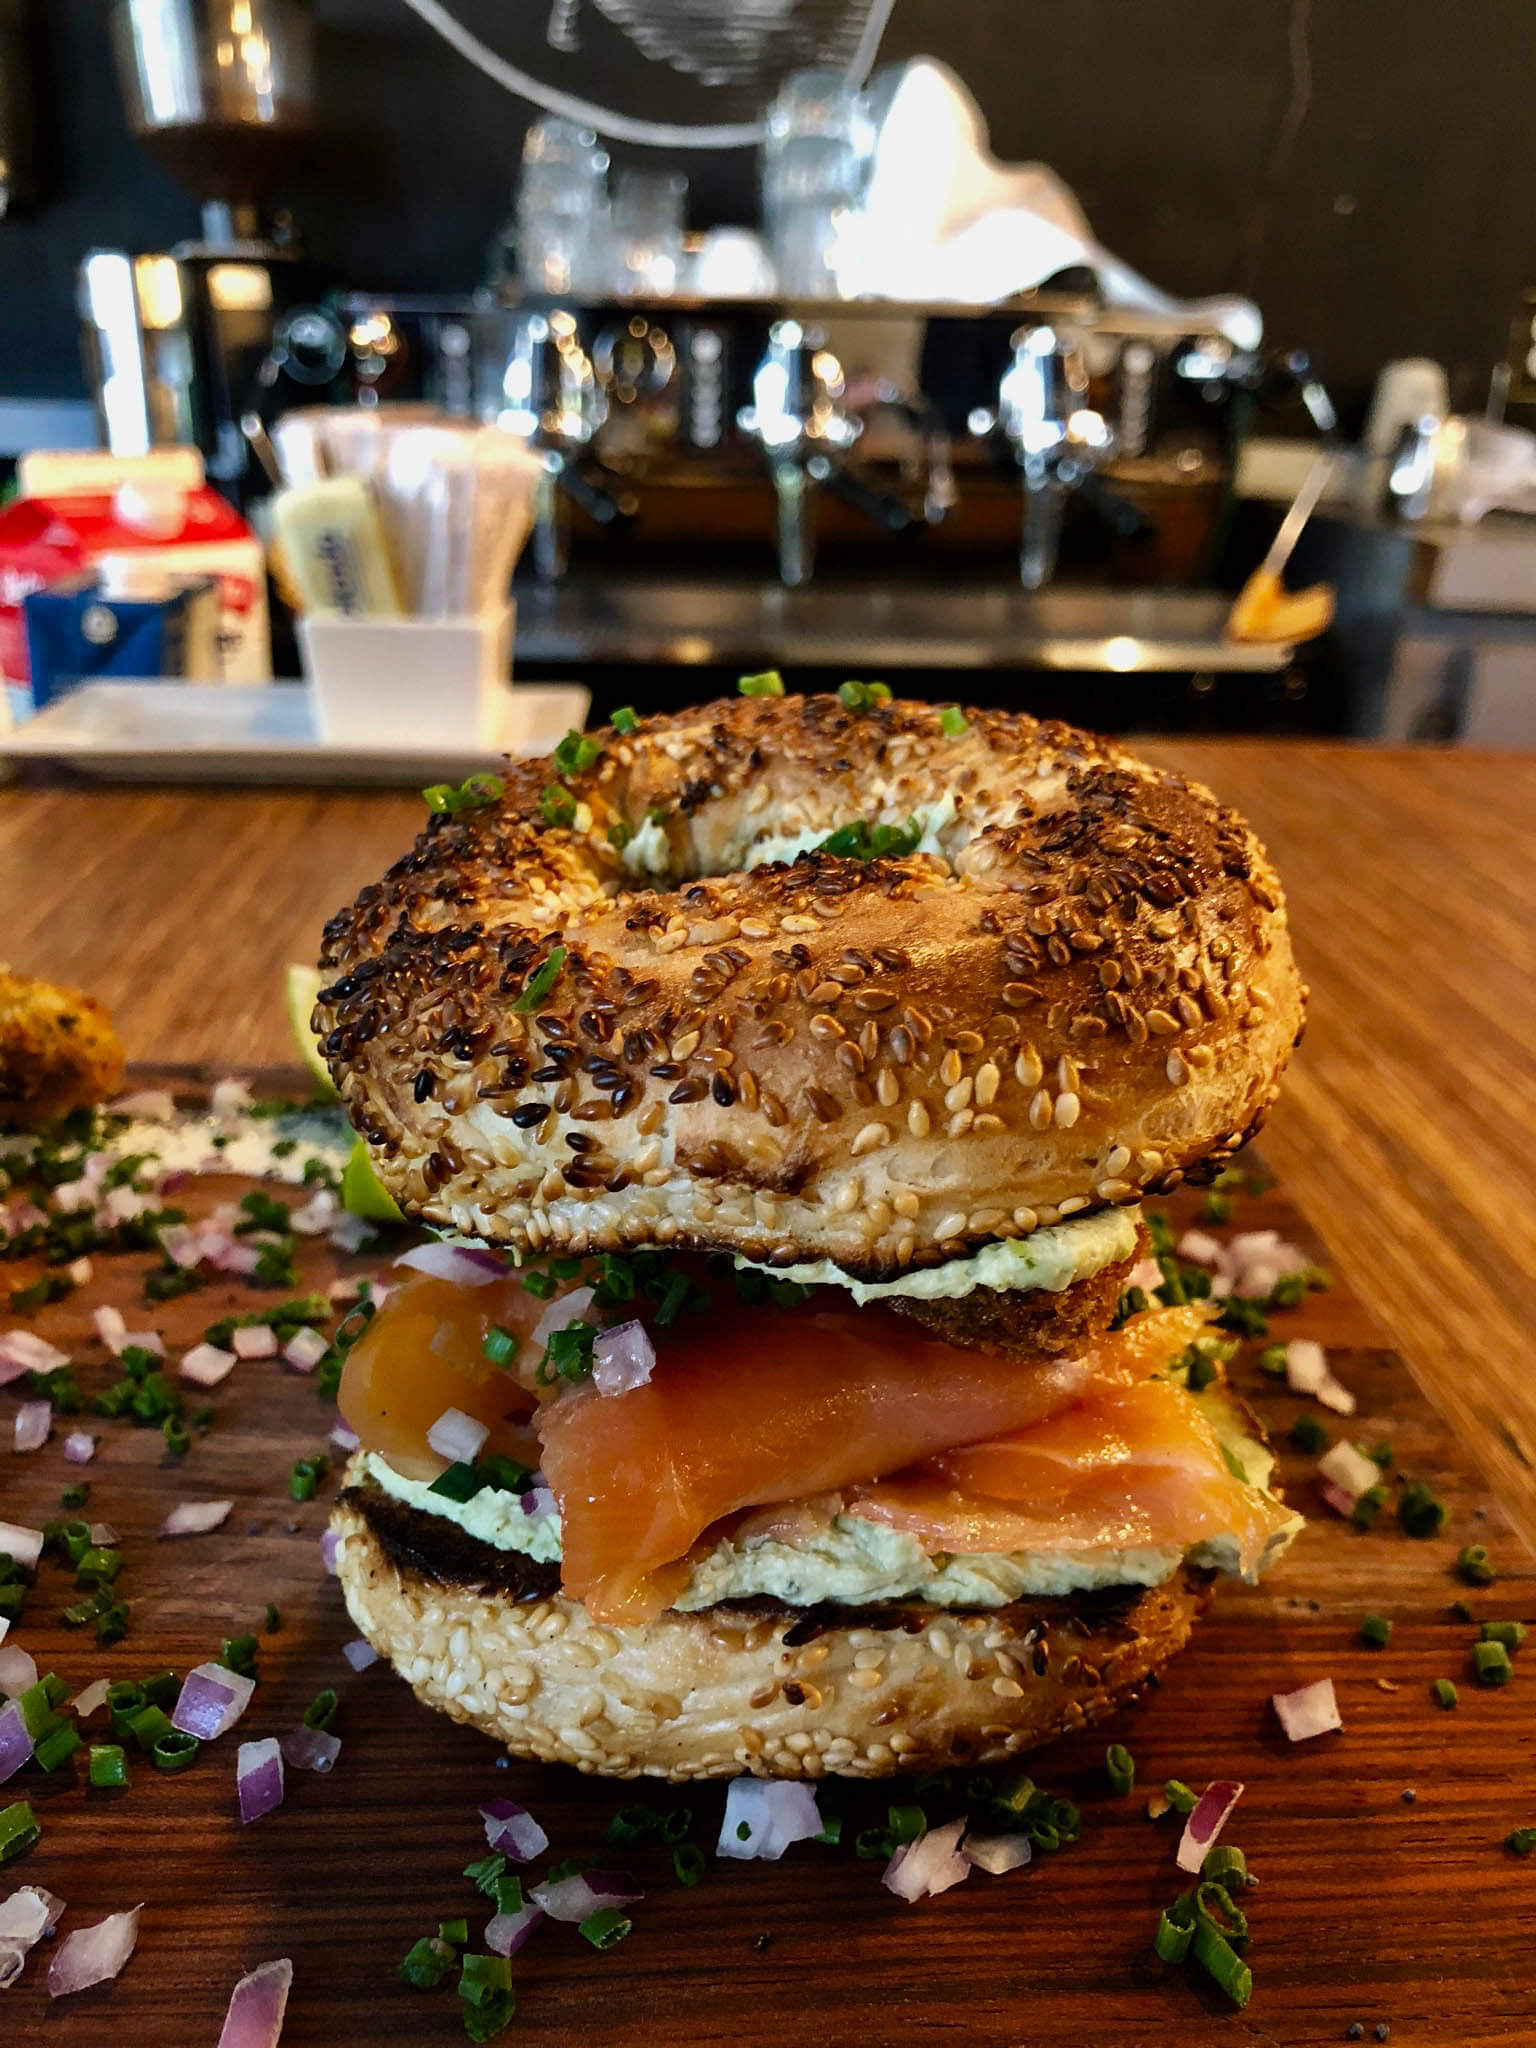 Montreal bagel and lox for brunch